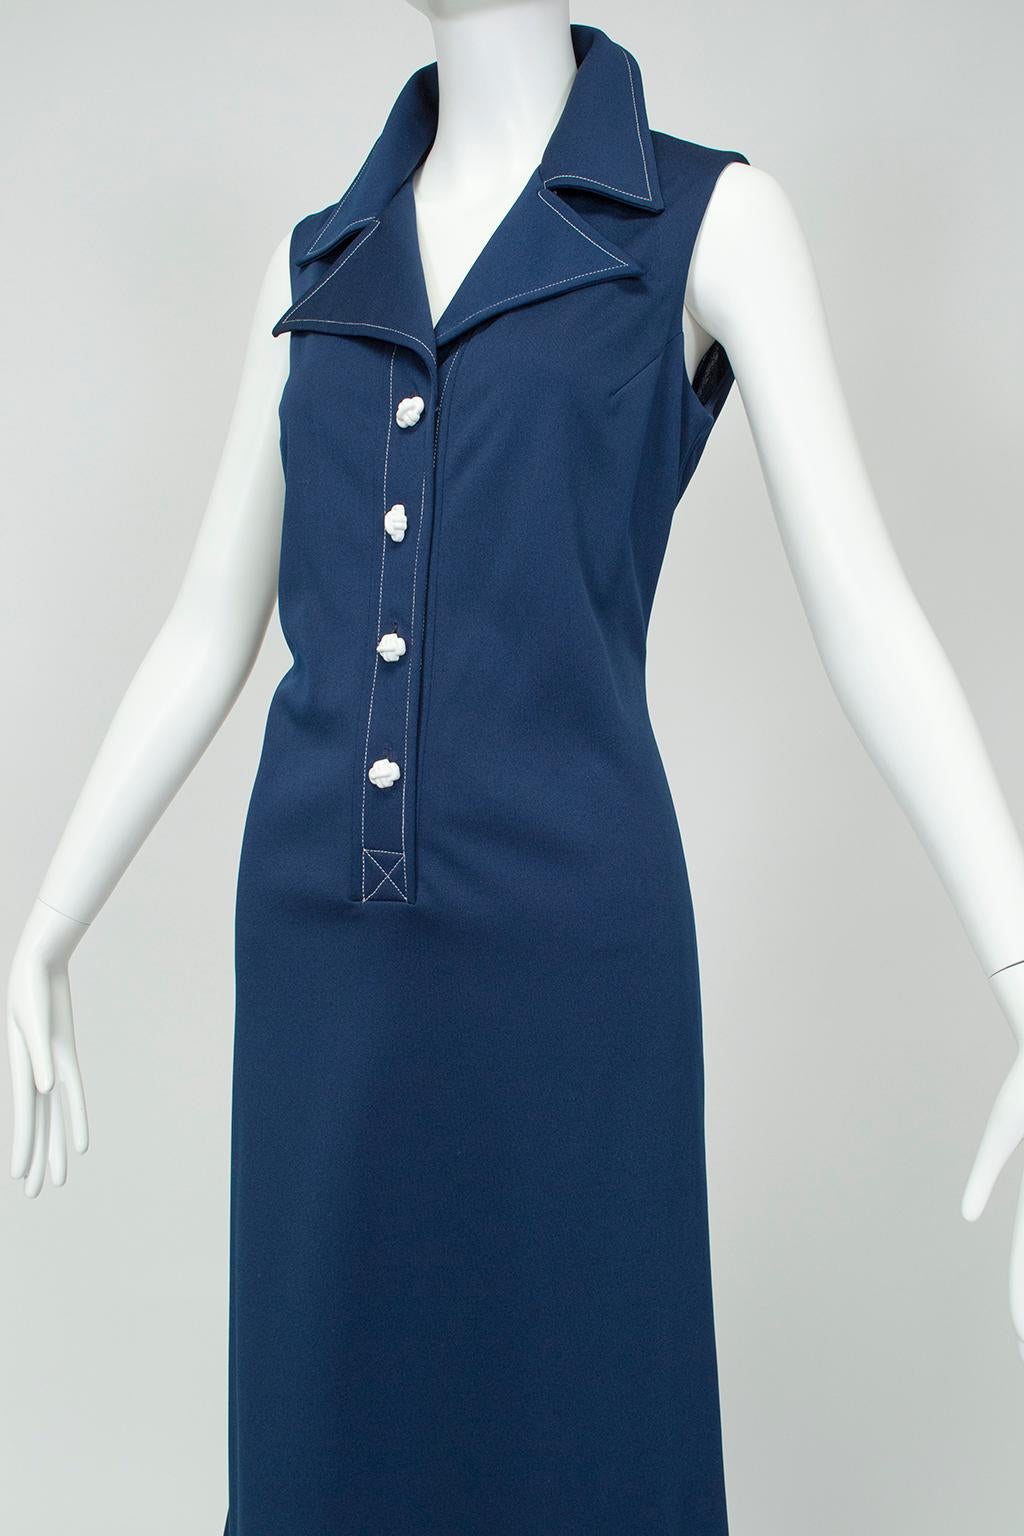 Purple Sleeveless Navy Jersey Sailor Dress with Nautical Buttons – M, 1960s For Sale